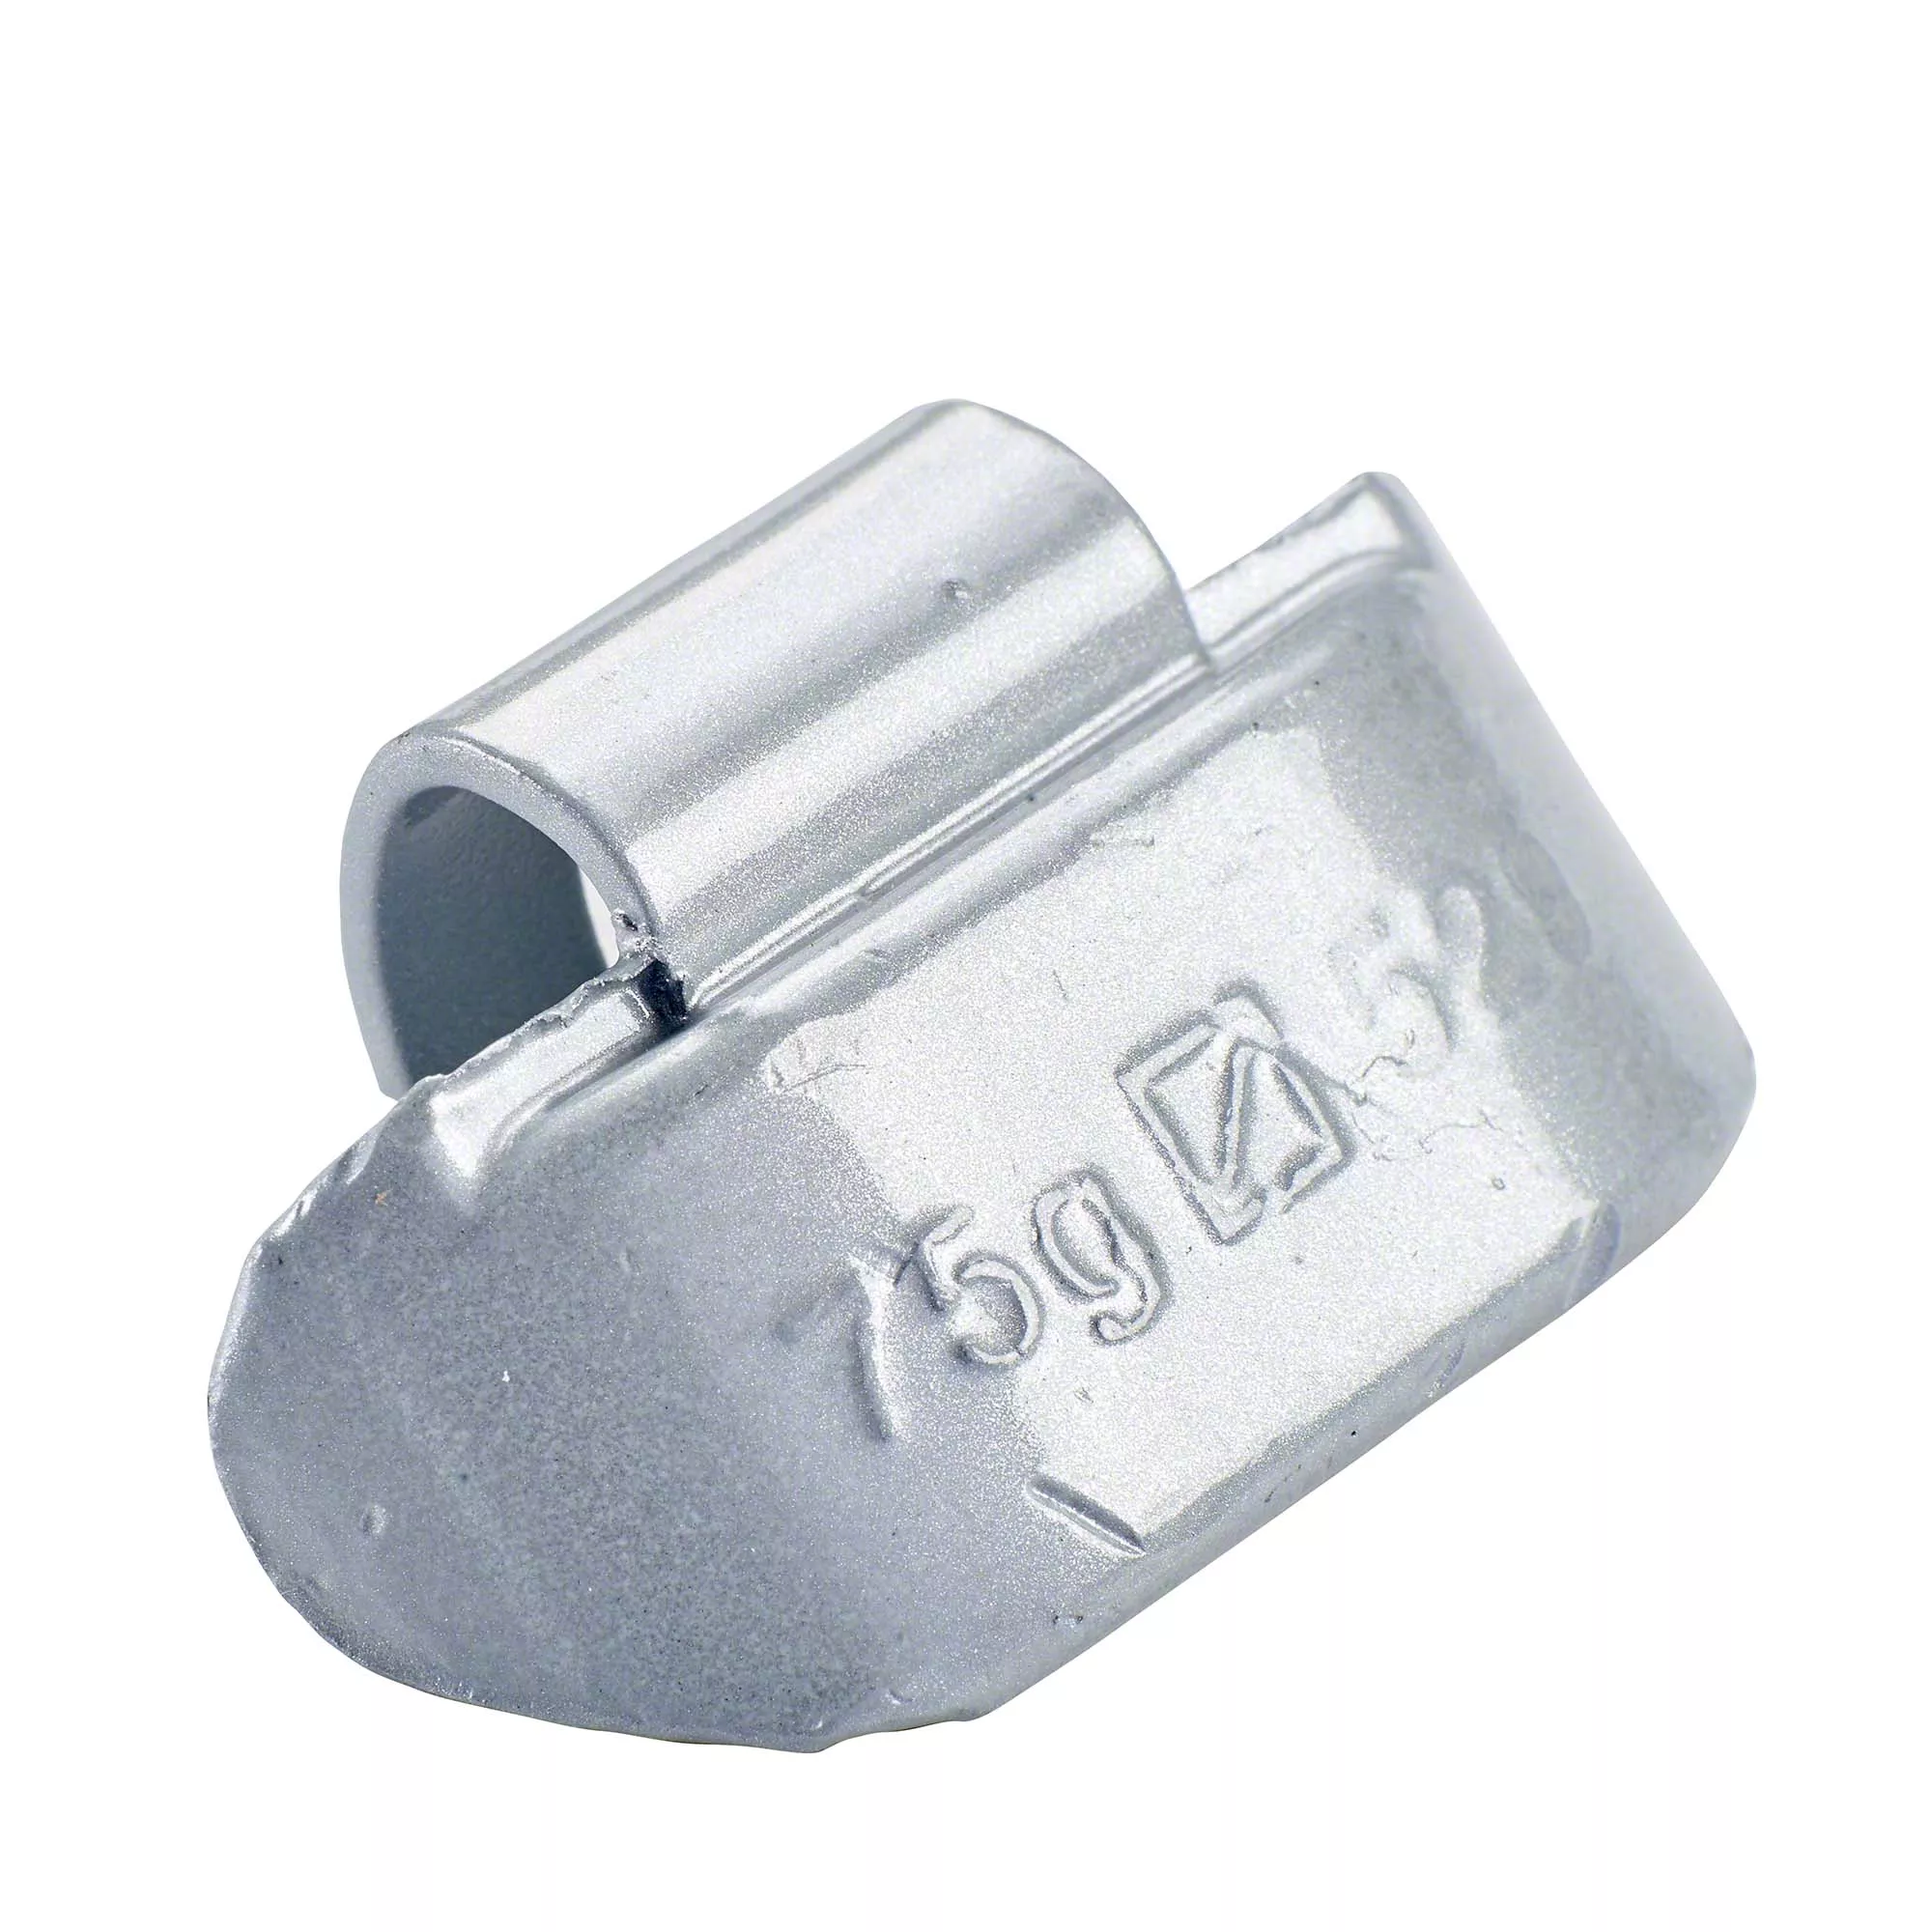 knock-on weight - Typ 529, 75 g, Lead, silver